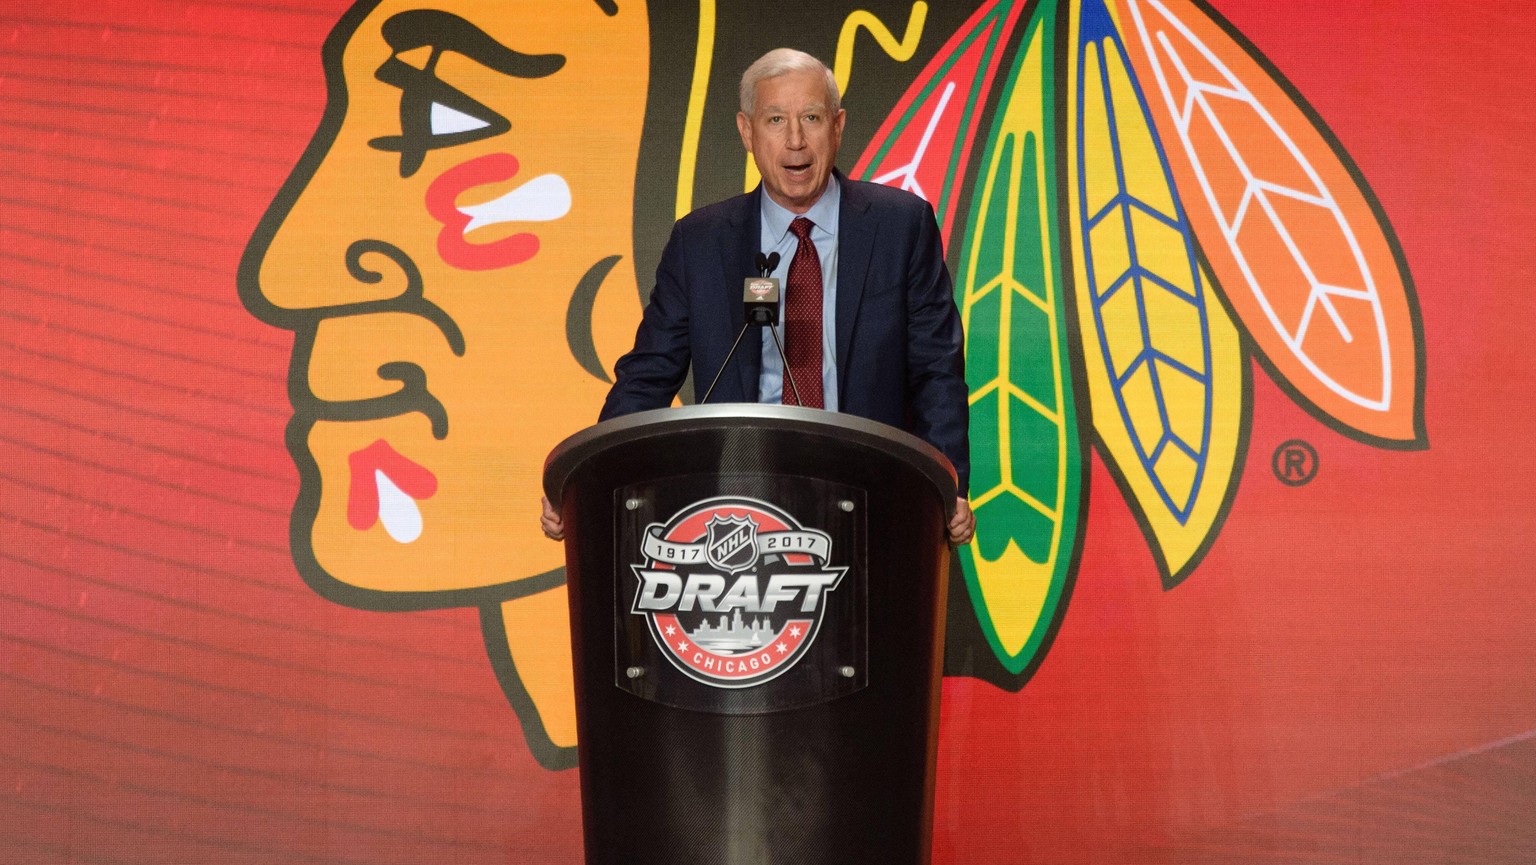 CHICAGO, IL - JUNE 23: The Chicago Blackhawks President &amp; CEO John McDonough speaks prior to the first round of the 2017 NHL Eishockey Herren USA Draft on June 23, 2017, at the United Center in Ch ...